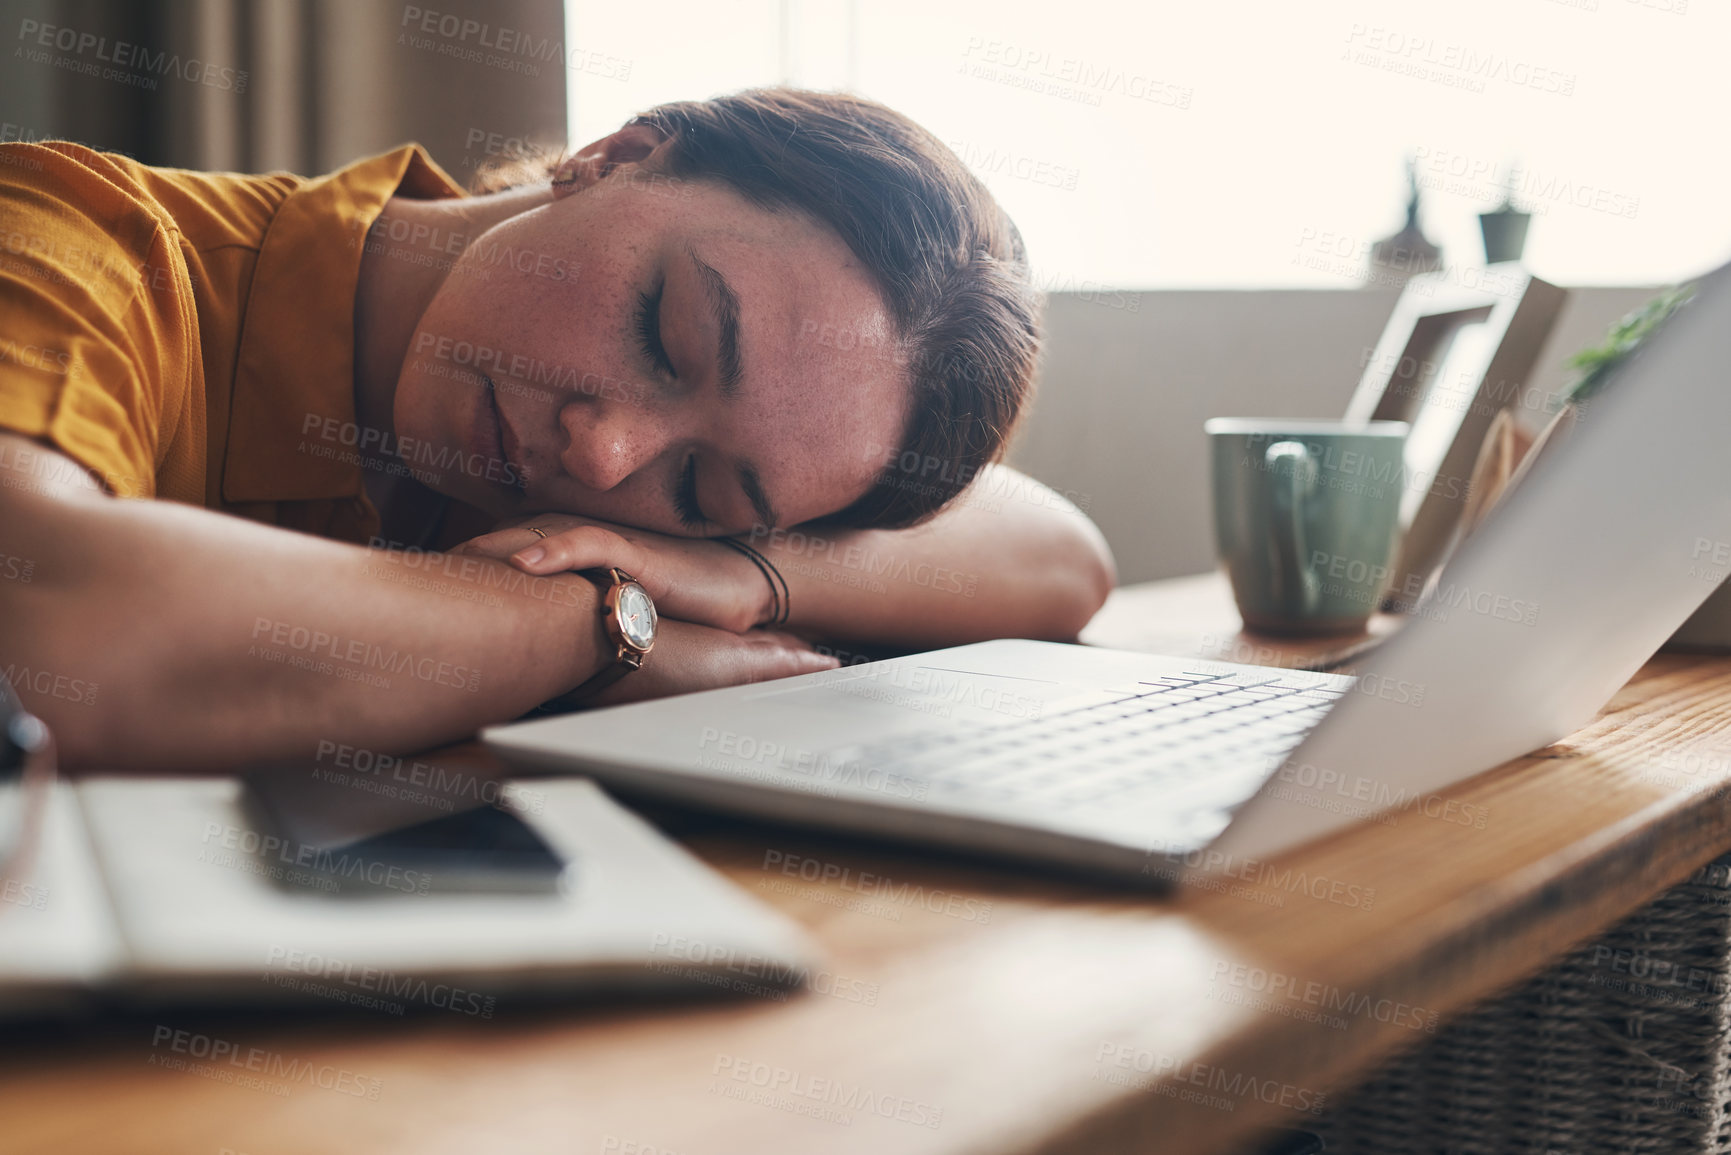 Buy stock photo Shot of a young woman sleeping at her desk while working from home